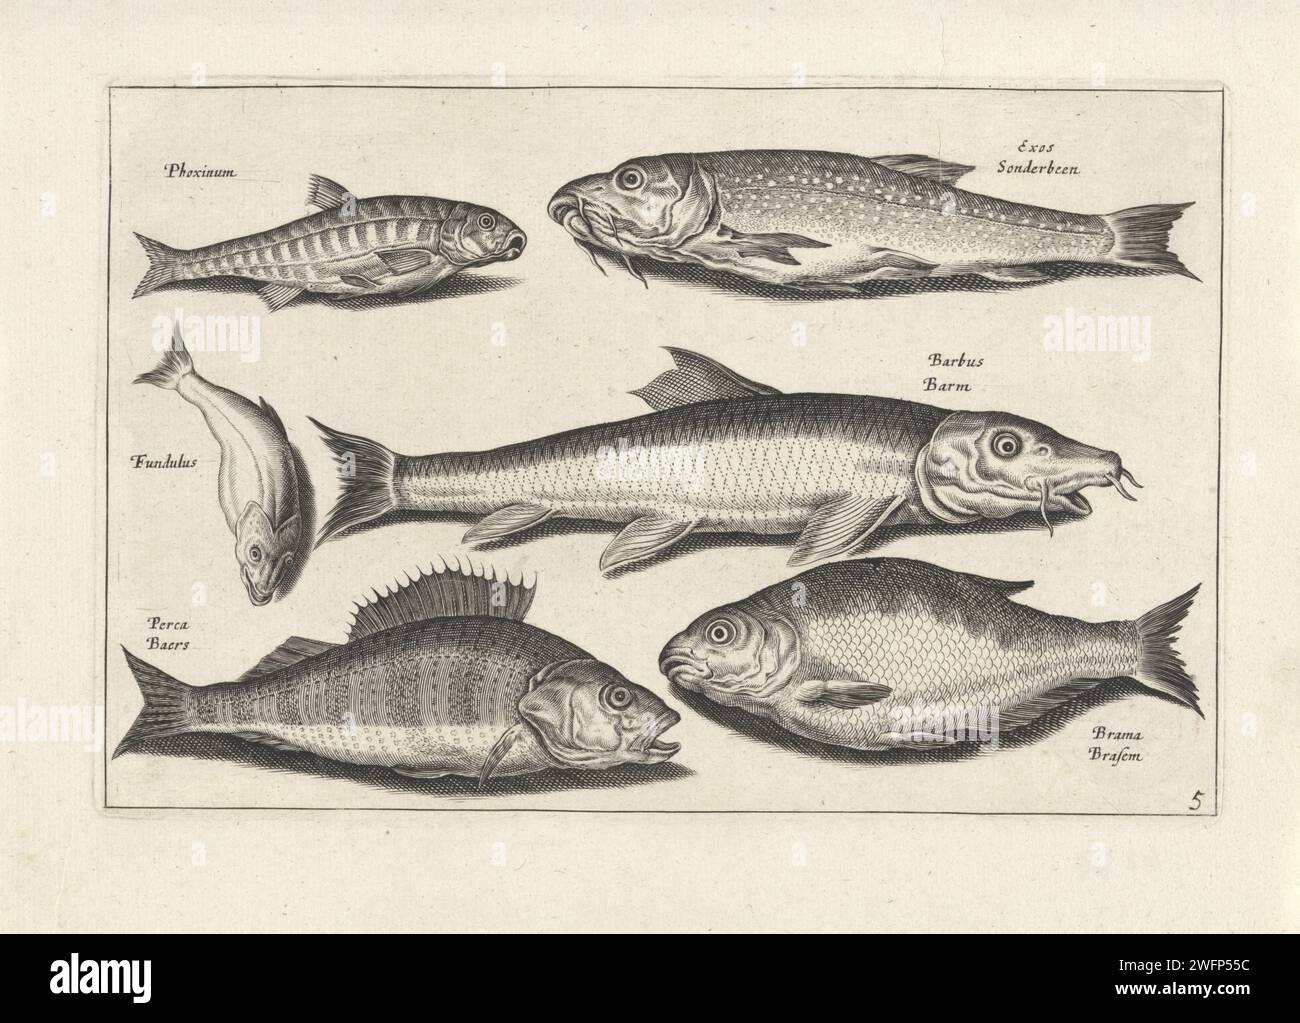 Six fish including a perch, Anonymous, After Adriaen Collaert, 1634 print A Phoxinus, a fundulus, a dotted fish, a barbus, a perch and a bream. Each fish is equipped with its name. The print is part of a series with fish as the subject. Amsterdam paper etching / engraving fishes. bony fishes: sea-perch Stock Photo